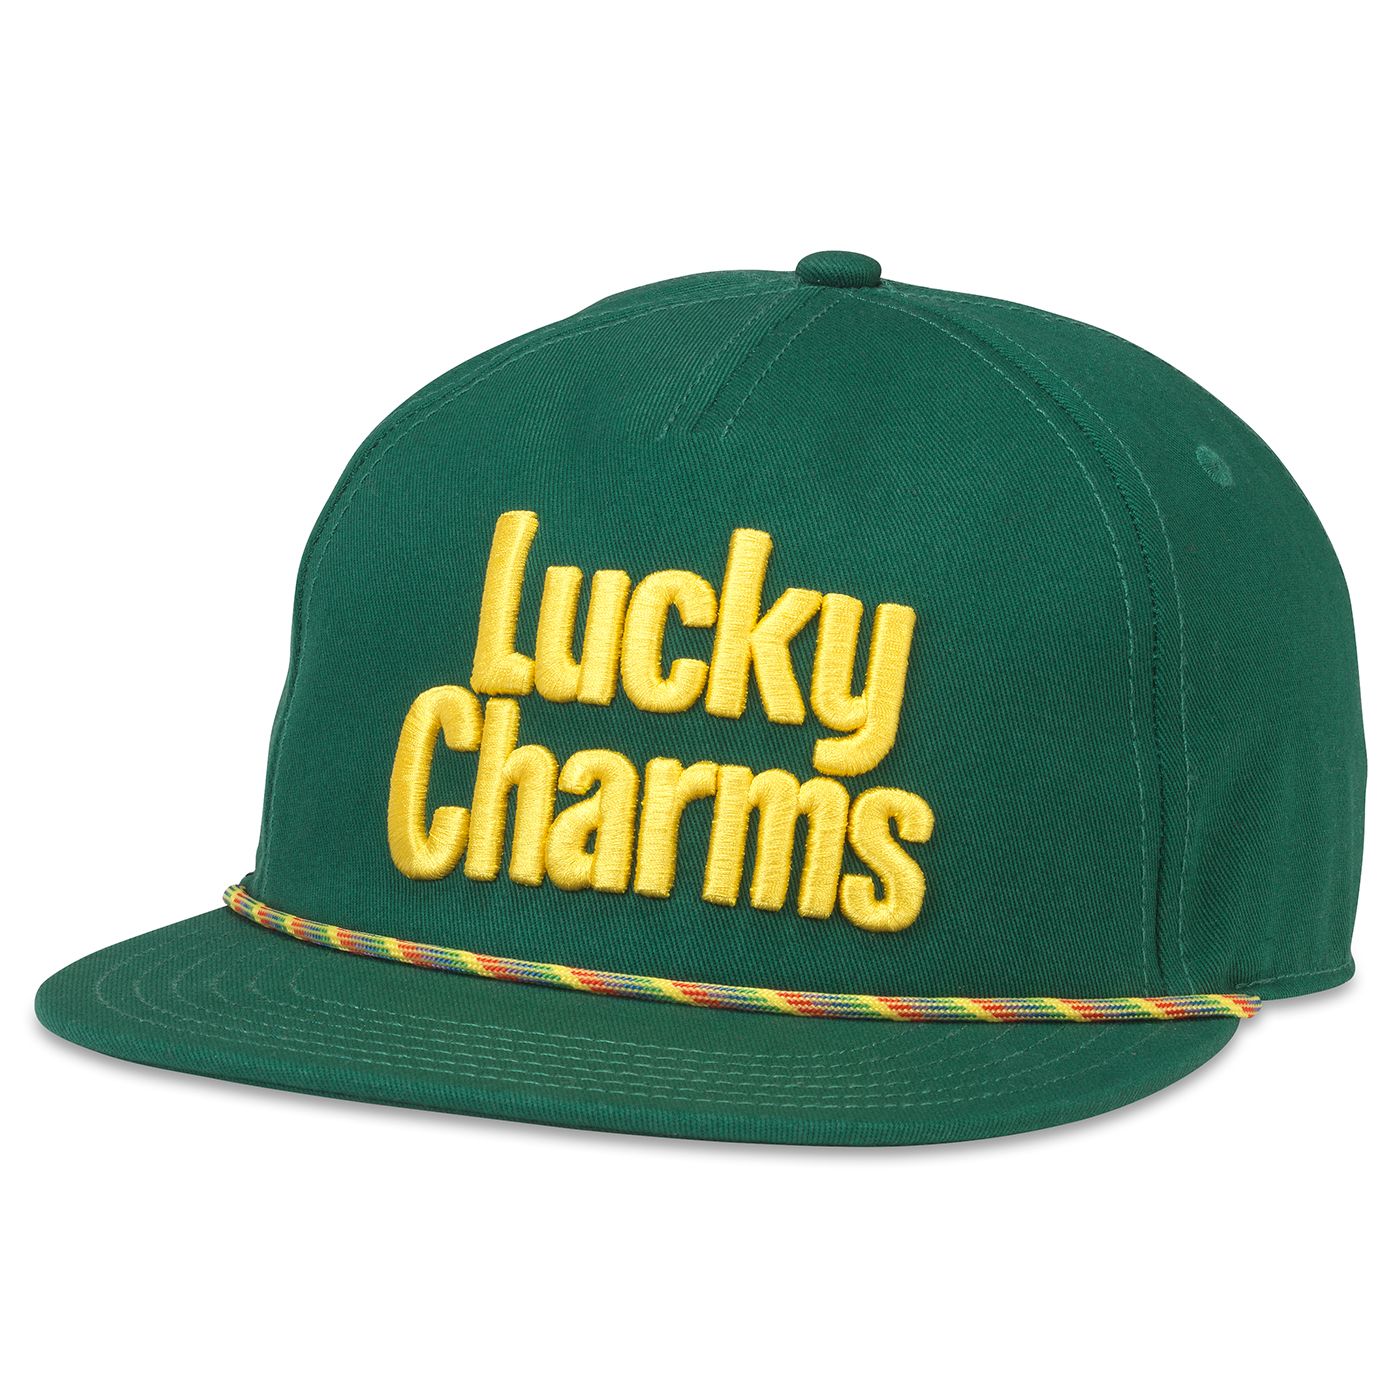 LUCKY CHARMS COACHELLA hat